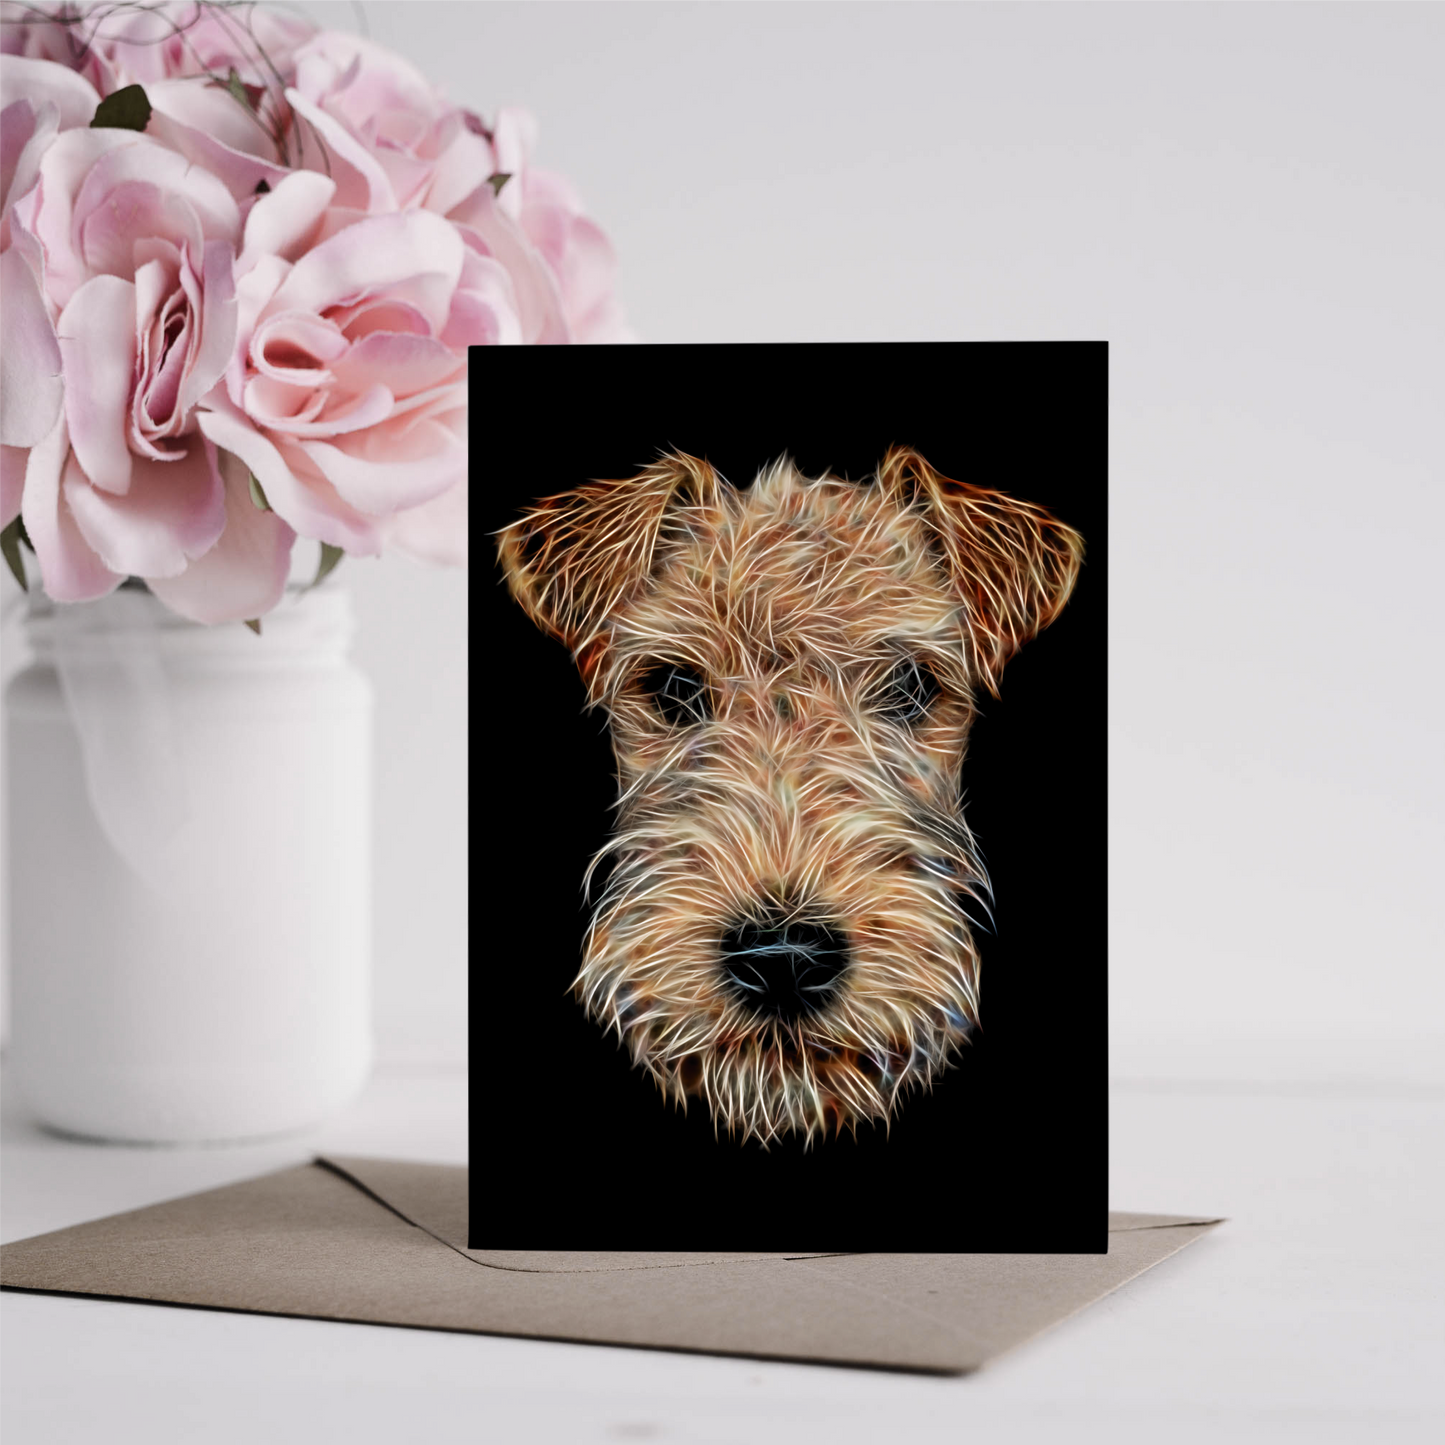 Lakeland Terrier Greeting Card Blank Inside for Birthdays or any other Occasion